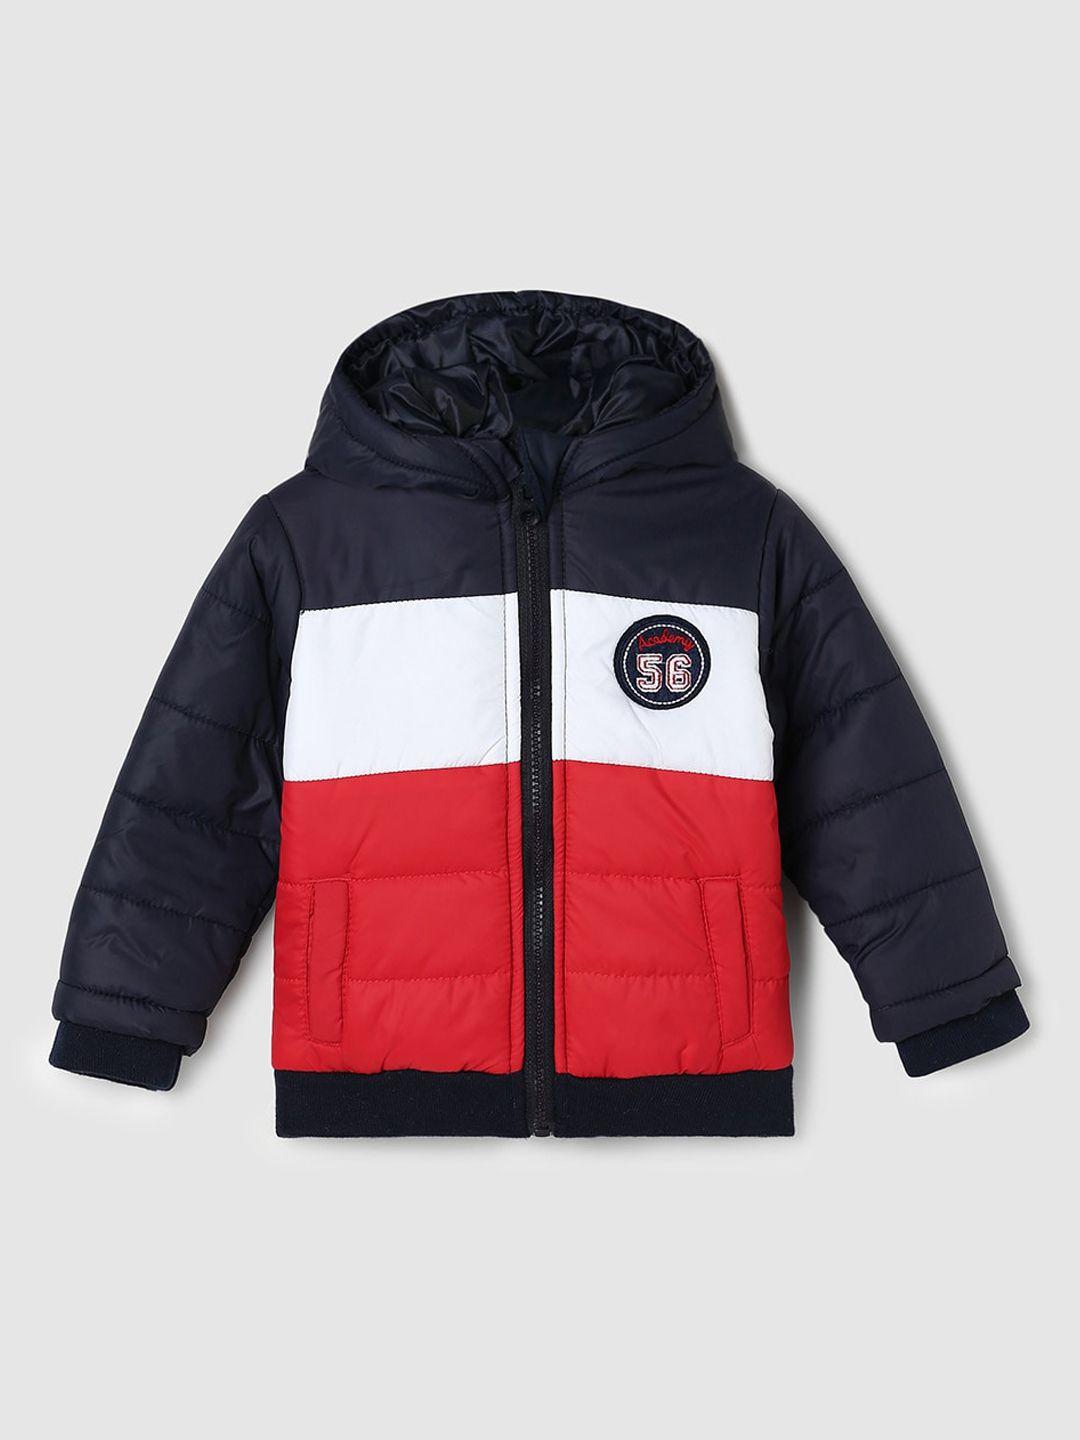 max Boys Black & Red Colourblocked Hooded Puffer Jacket with Patchwork